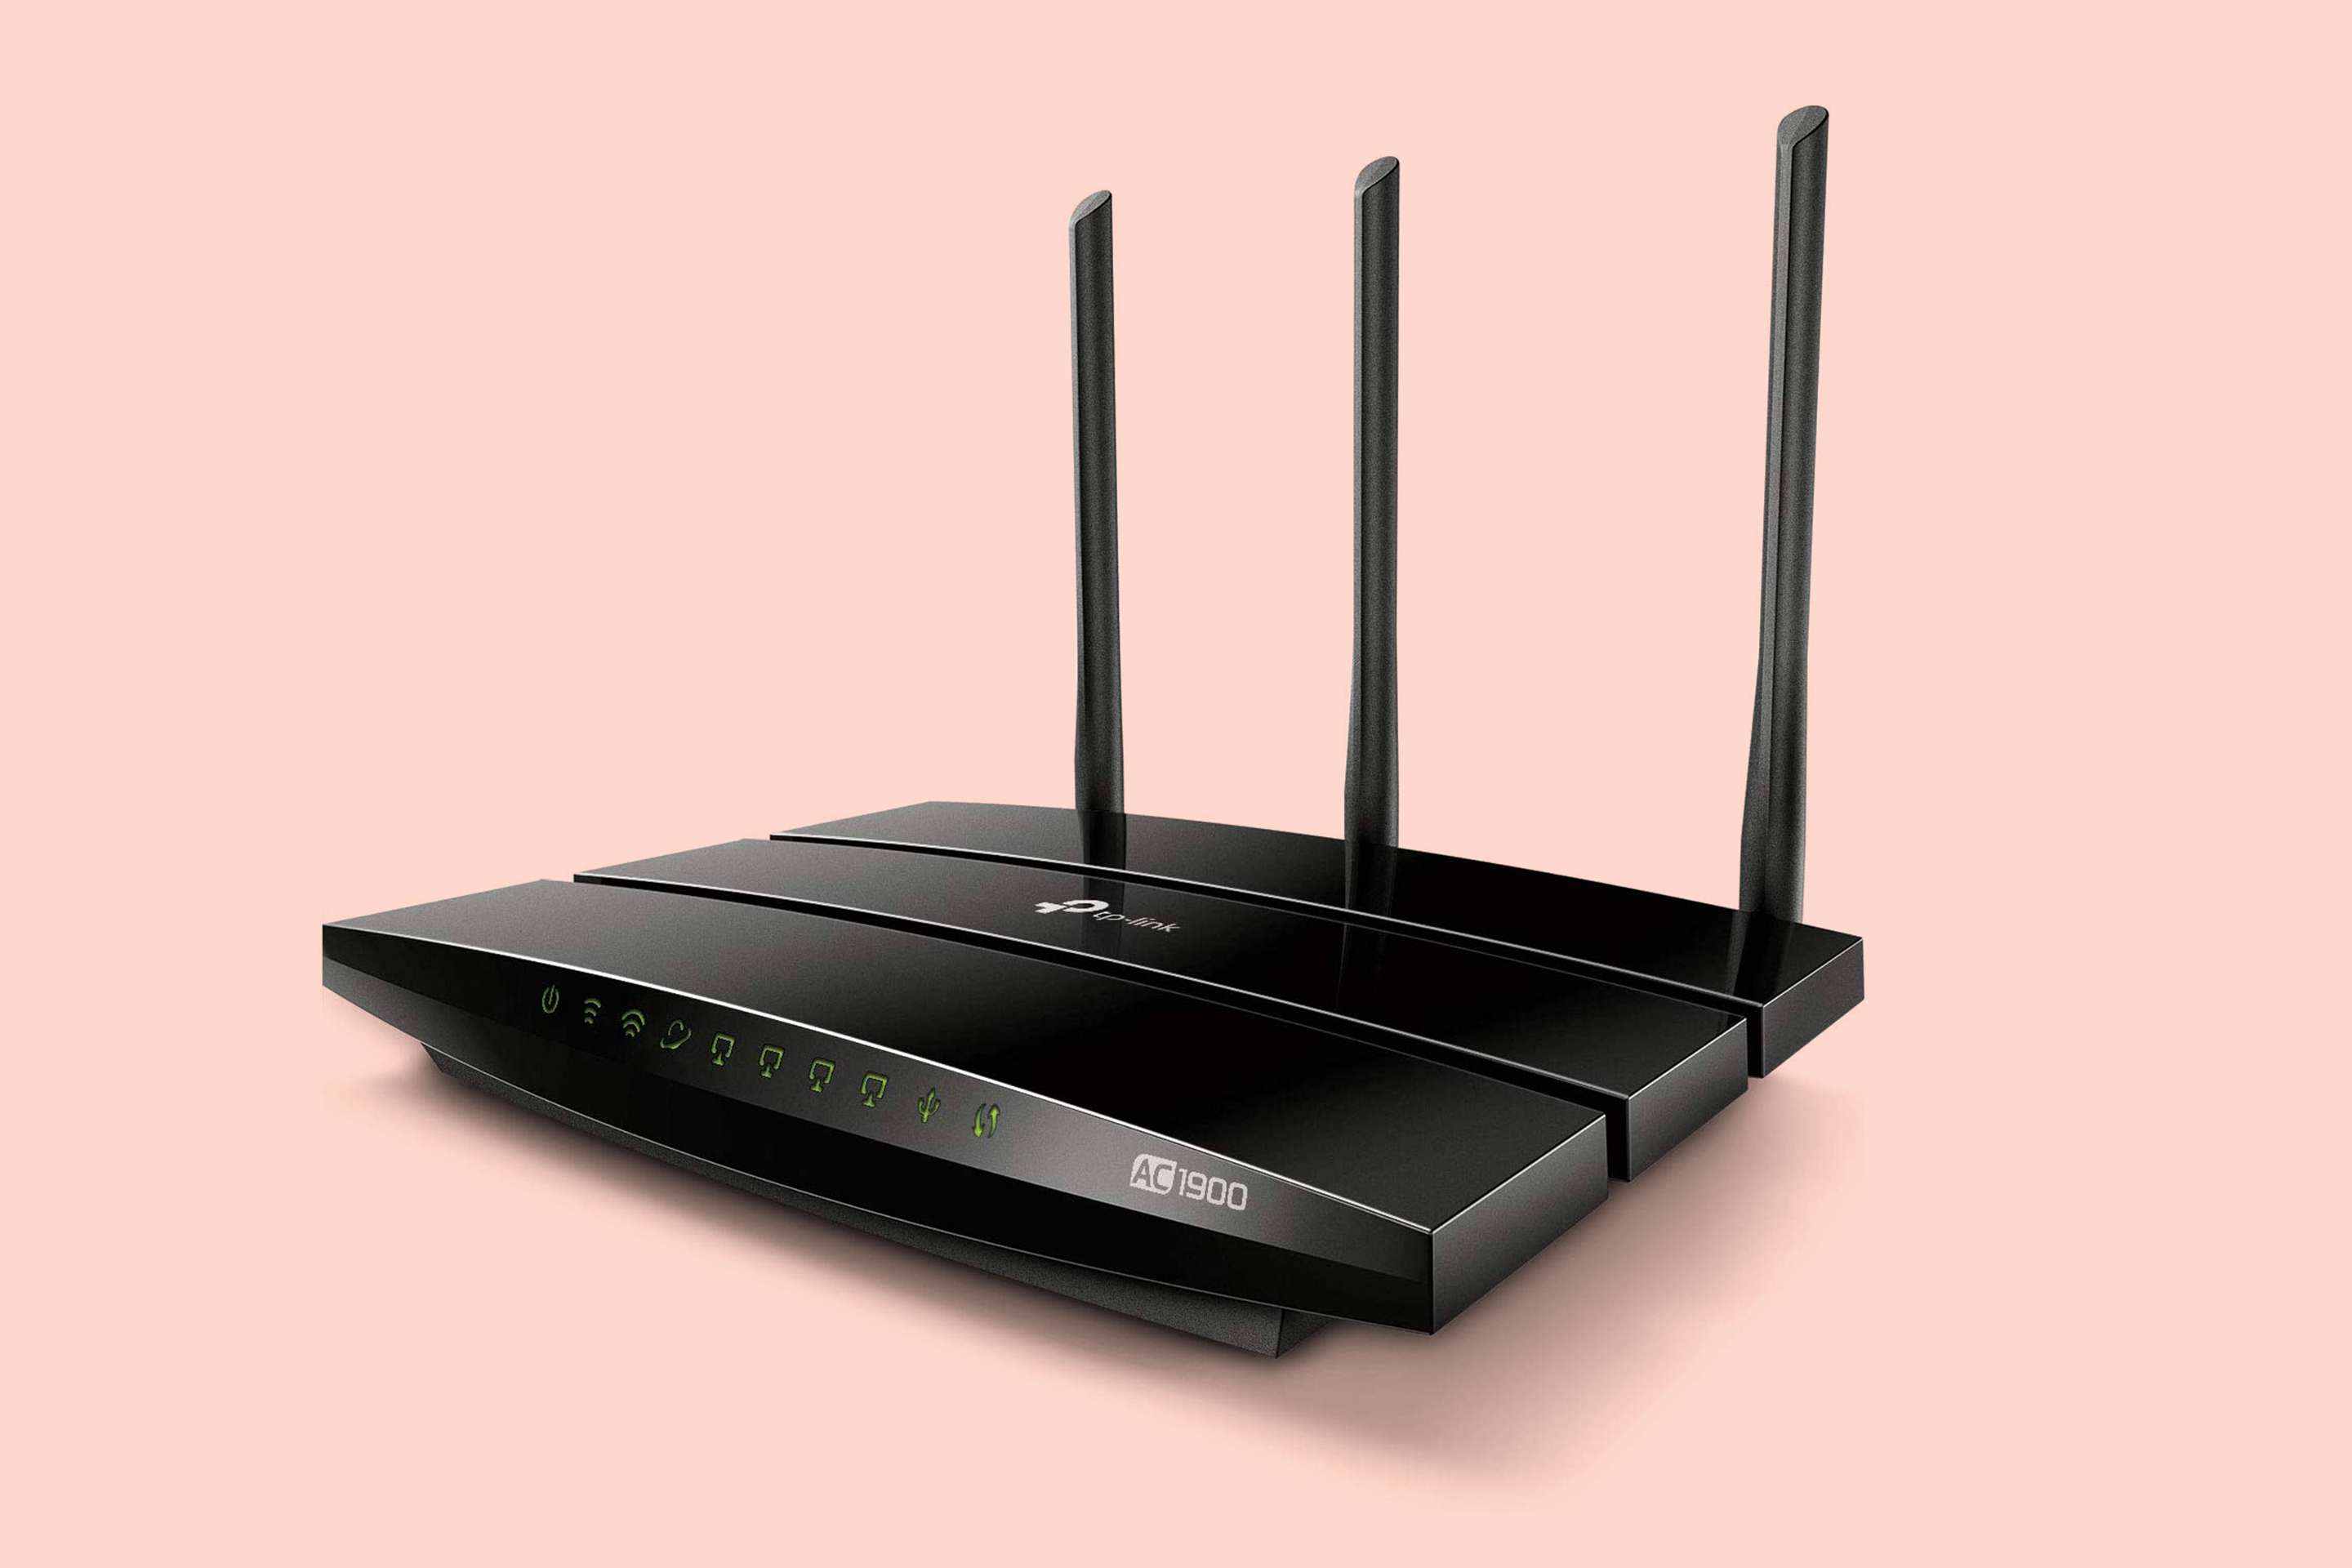 The Best Routers for Fiber Optic Internet in 2021 